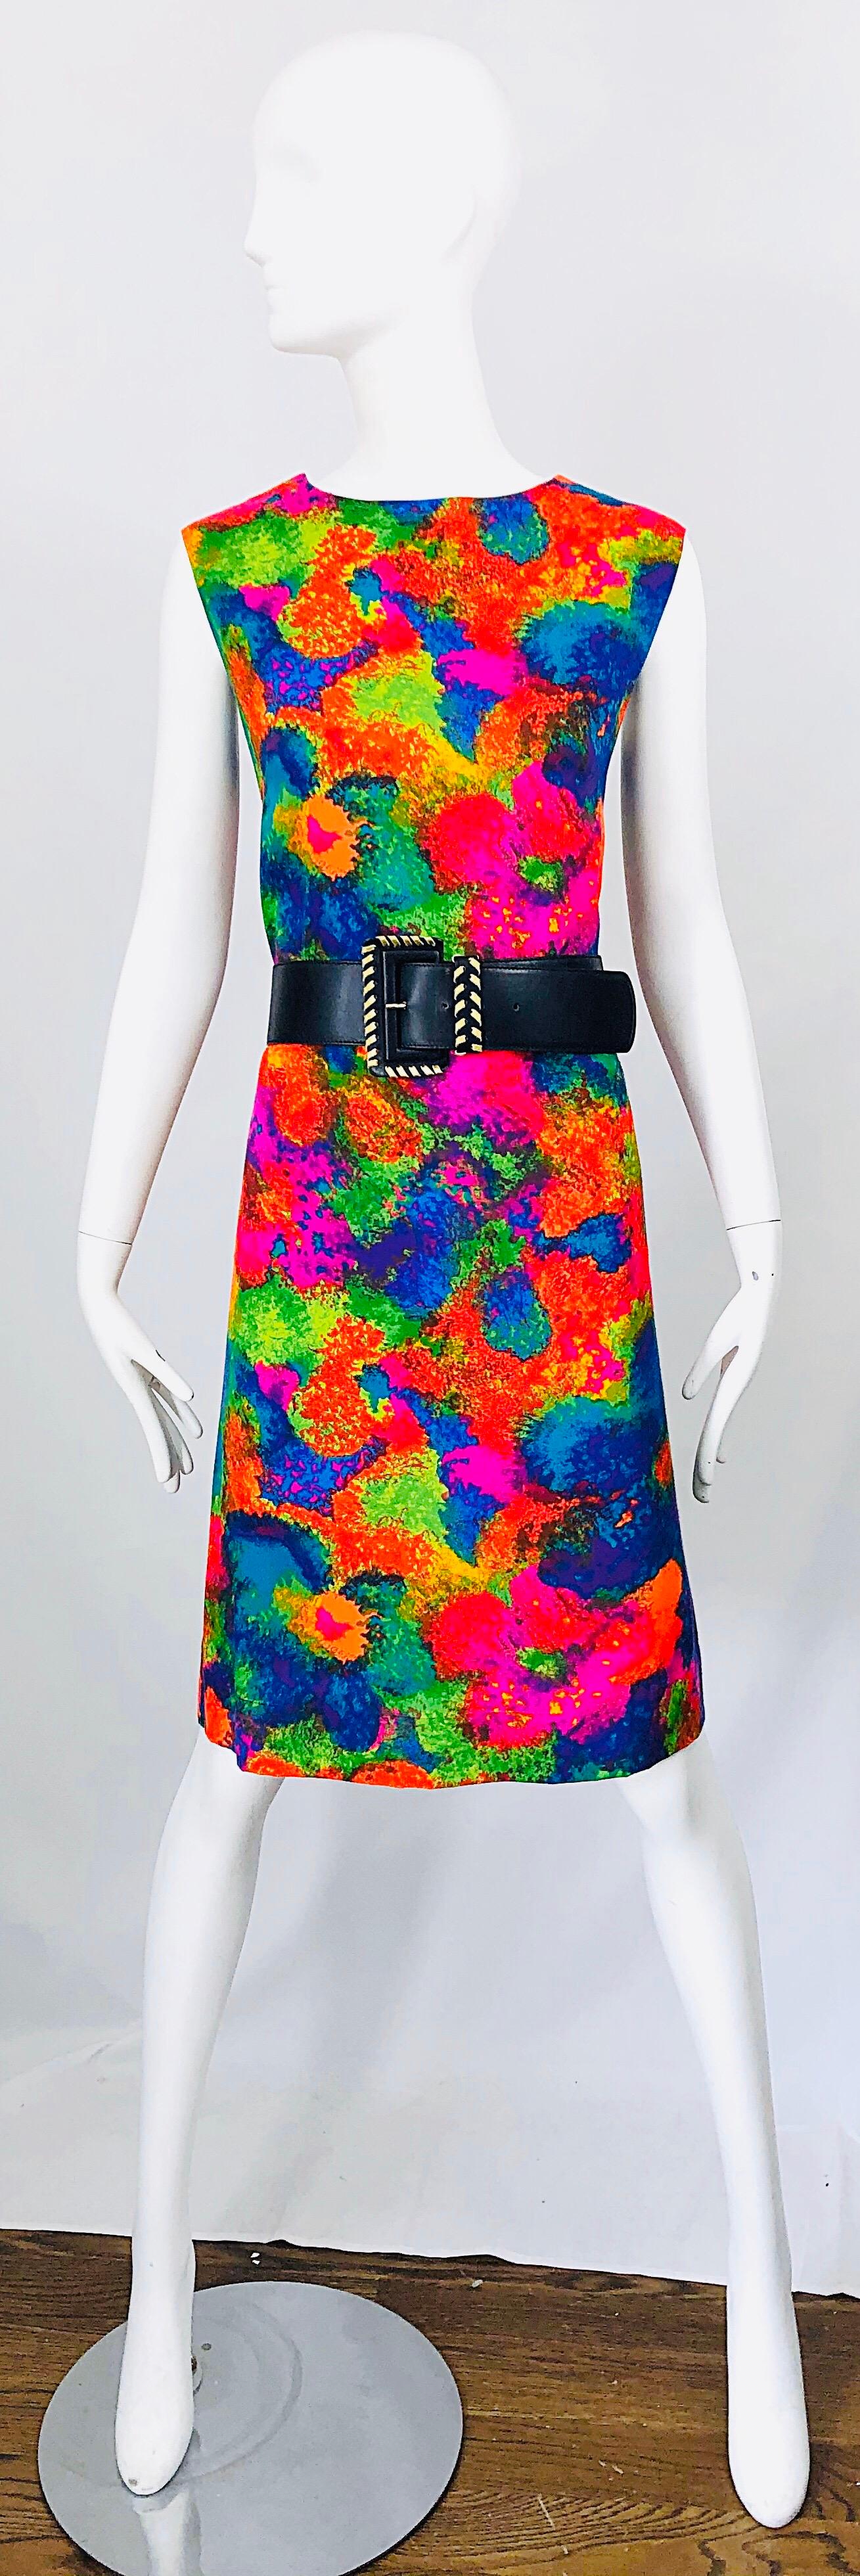 Women's Chic 1960s Larger Size Neon Abstract Flower Print Vintage 60s Cotton Shift Dress For Sale